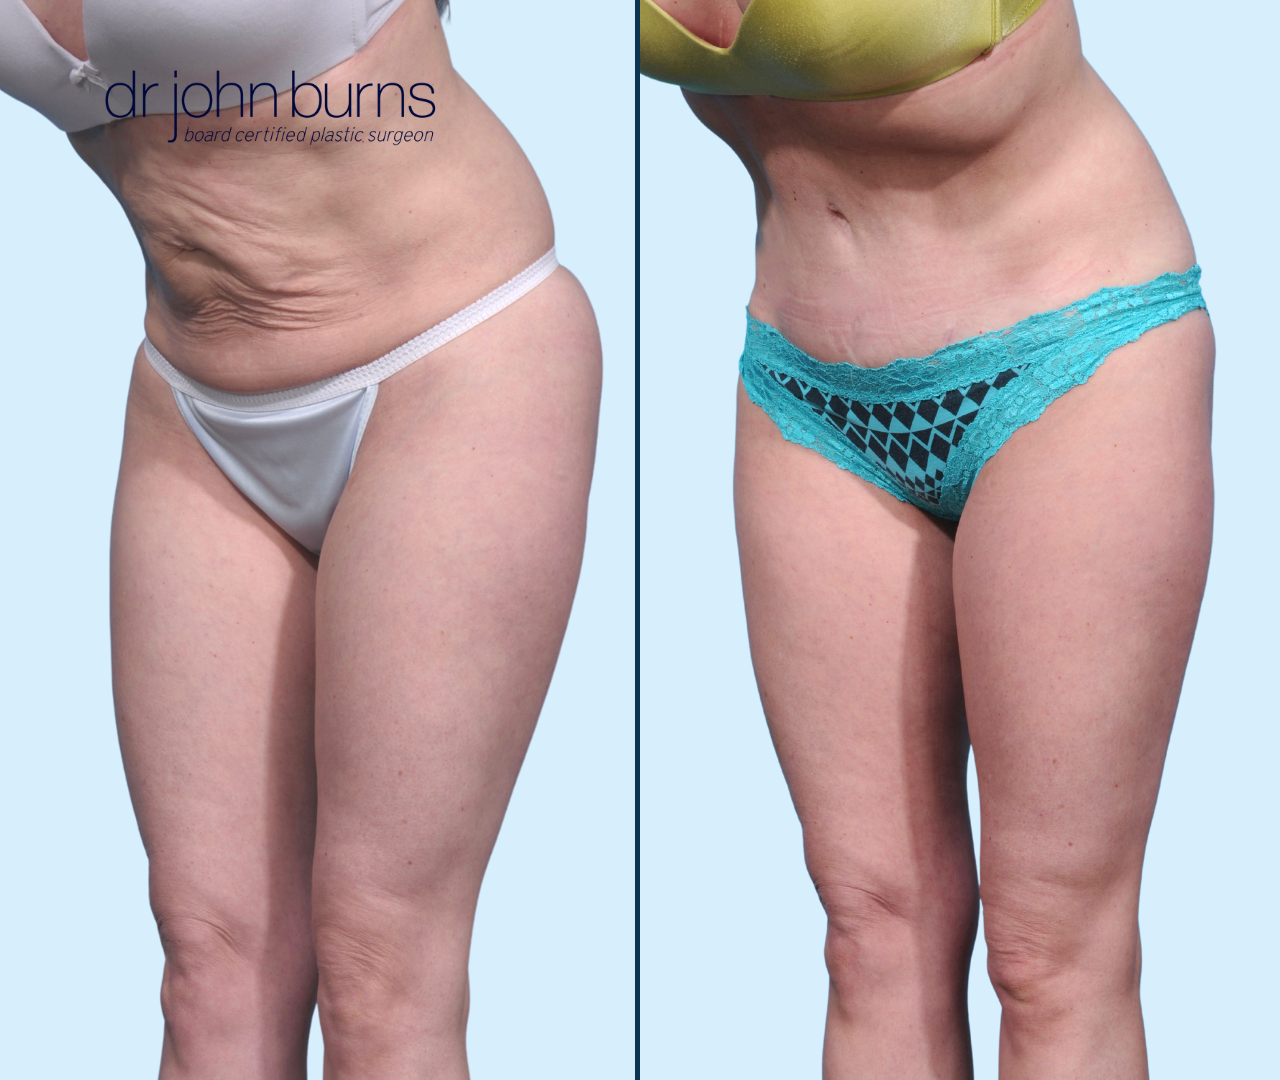 Dallas Tummy Tuck Before & After Results by Dr. John Burns – Dr John Burns